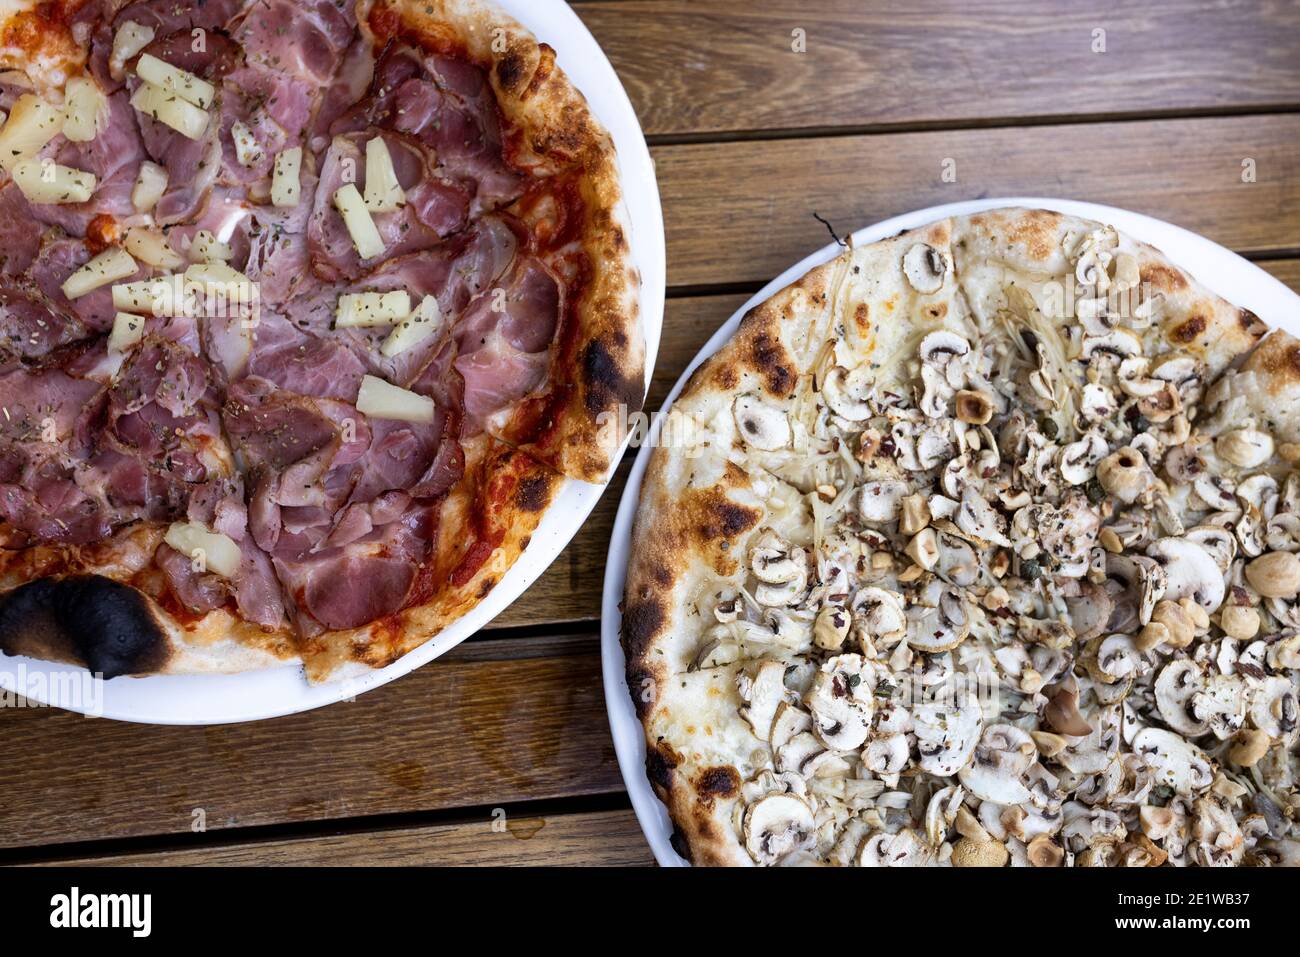 Overhead view of ham and pineapple and mushroom and onion pizzas Stock Photo